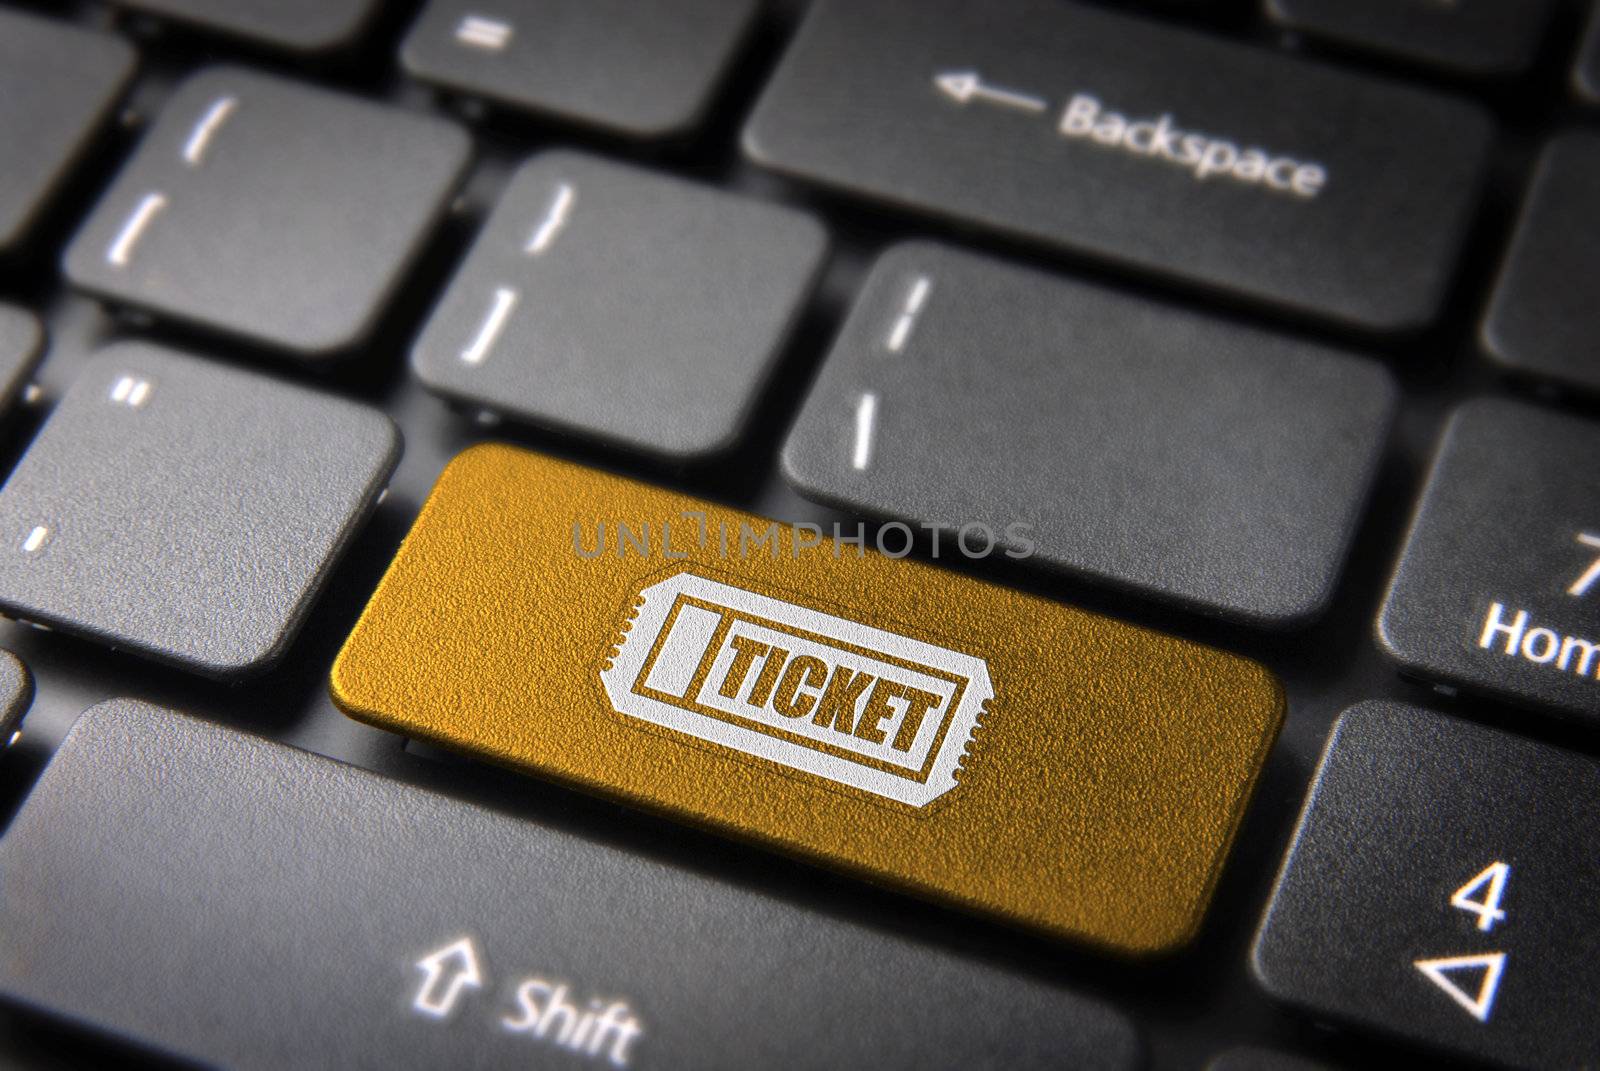 Buy entrance online key with ticket icon on laptop keyboard. Included clipping path, so you can easily edit it.